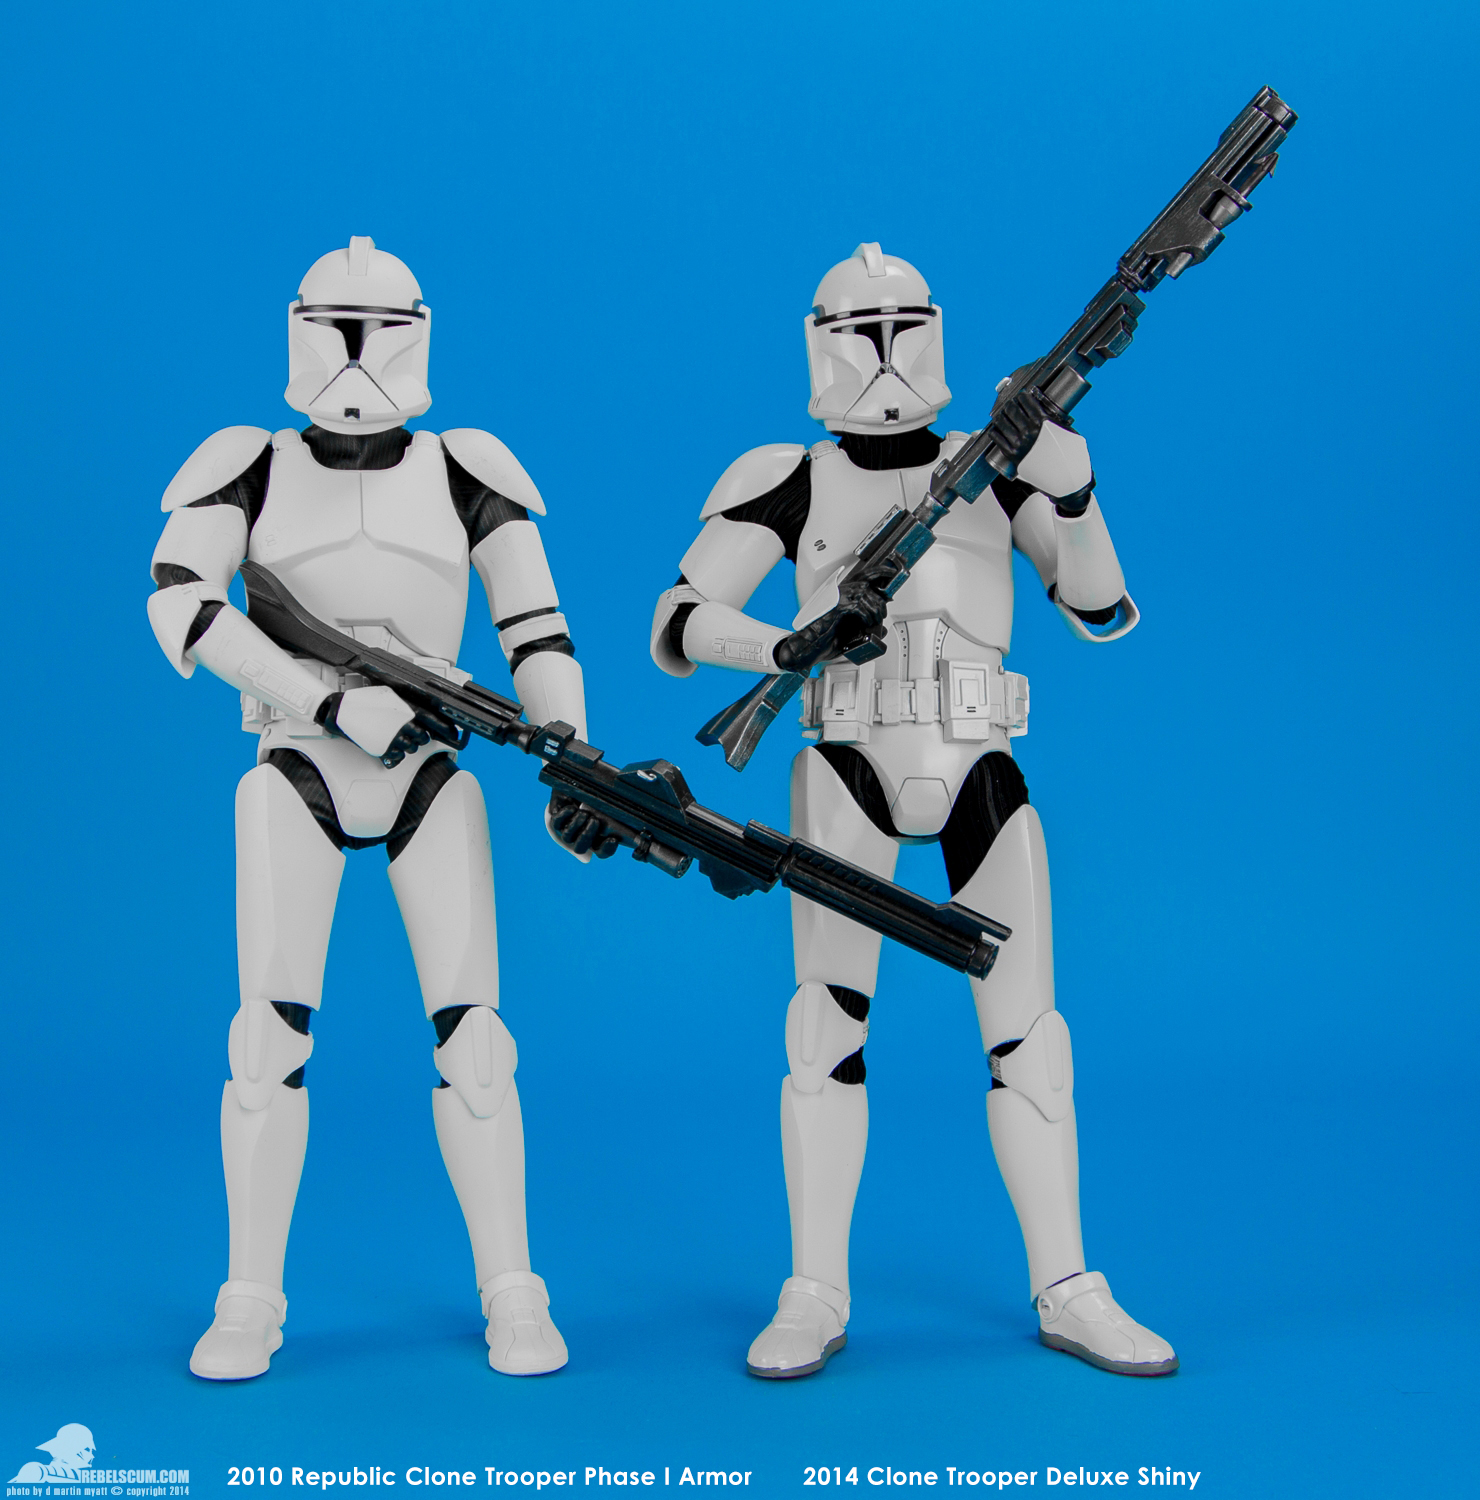 Shiny-Clone-Trooper-Deluxe-Sixth-Scale-Figure-Sideshow-022.jpg